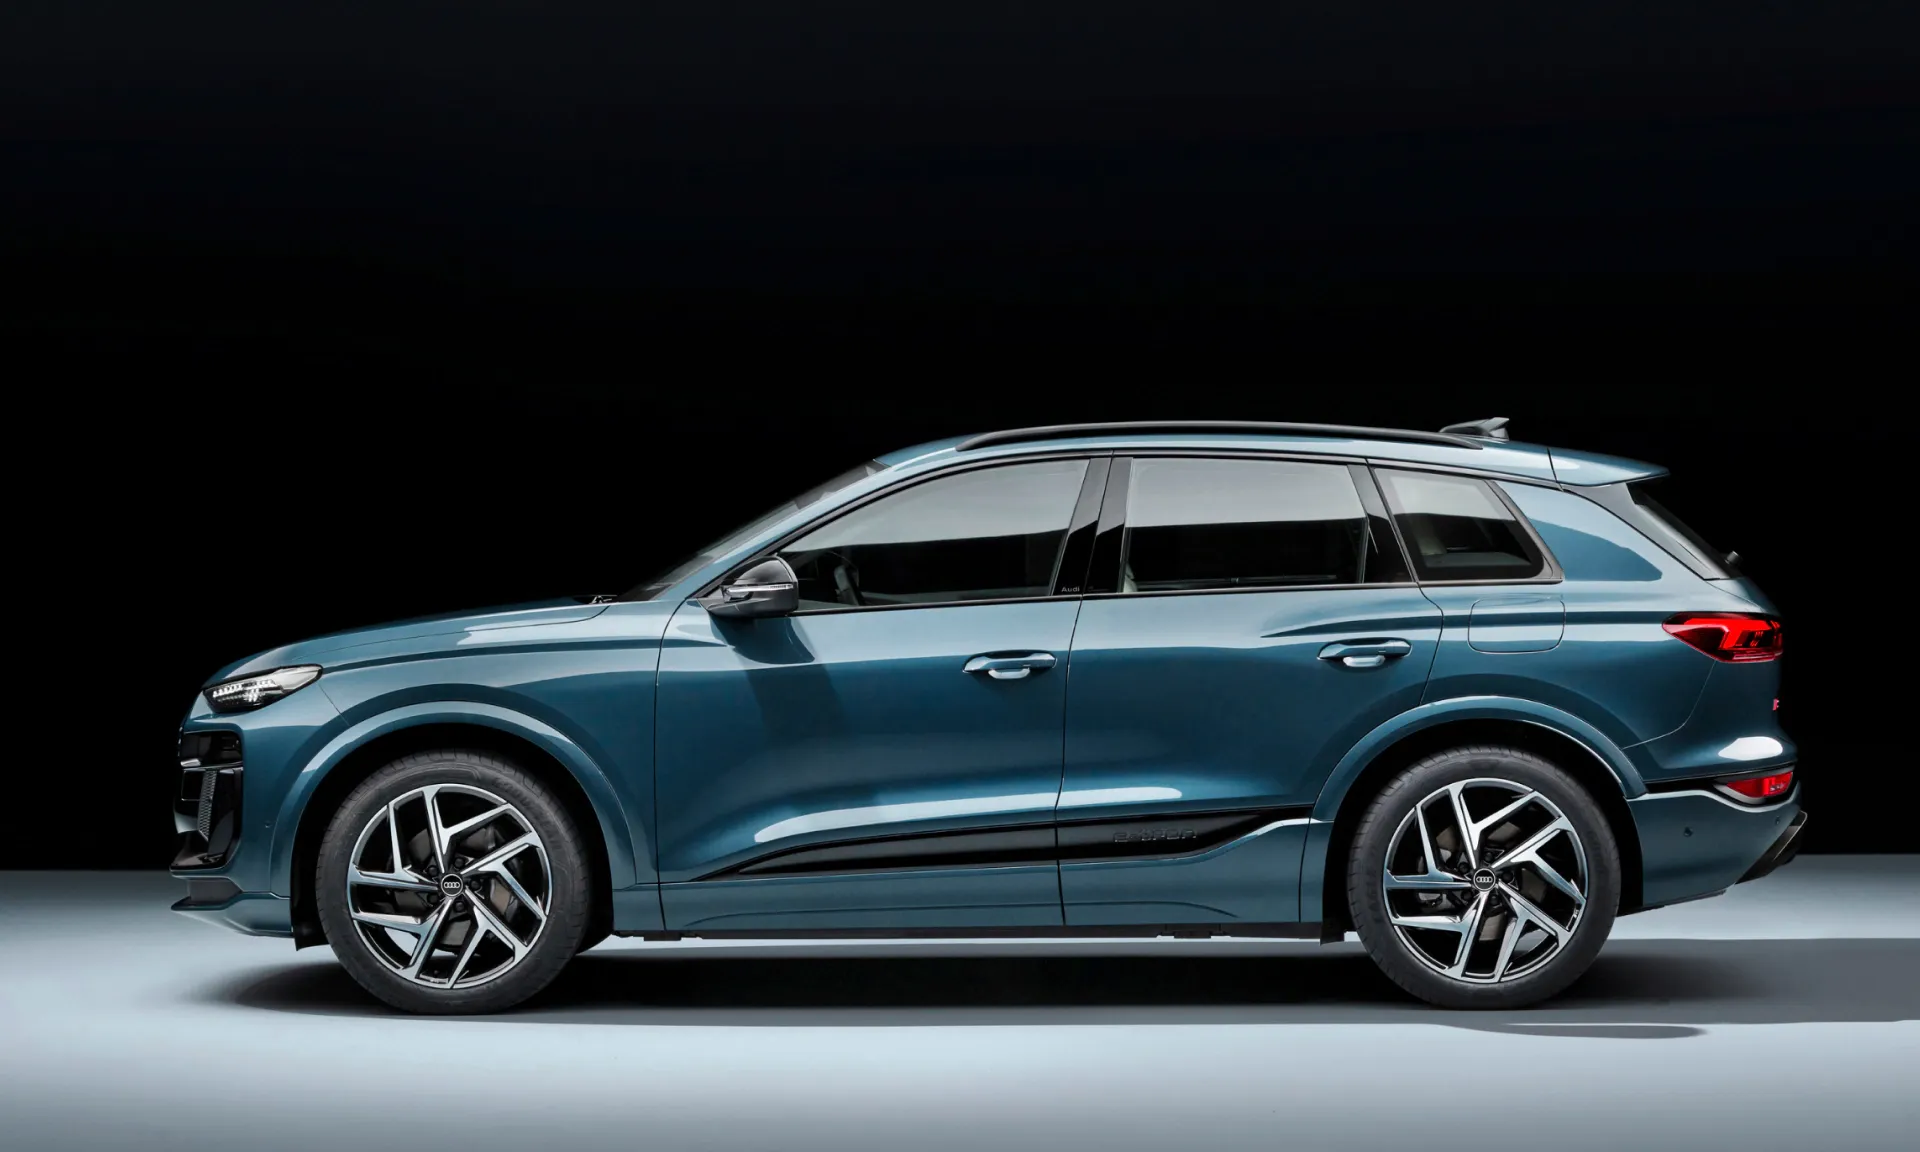 Side view of the new Audi Q6 e-tron.